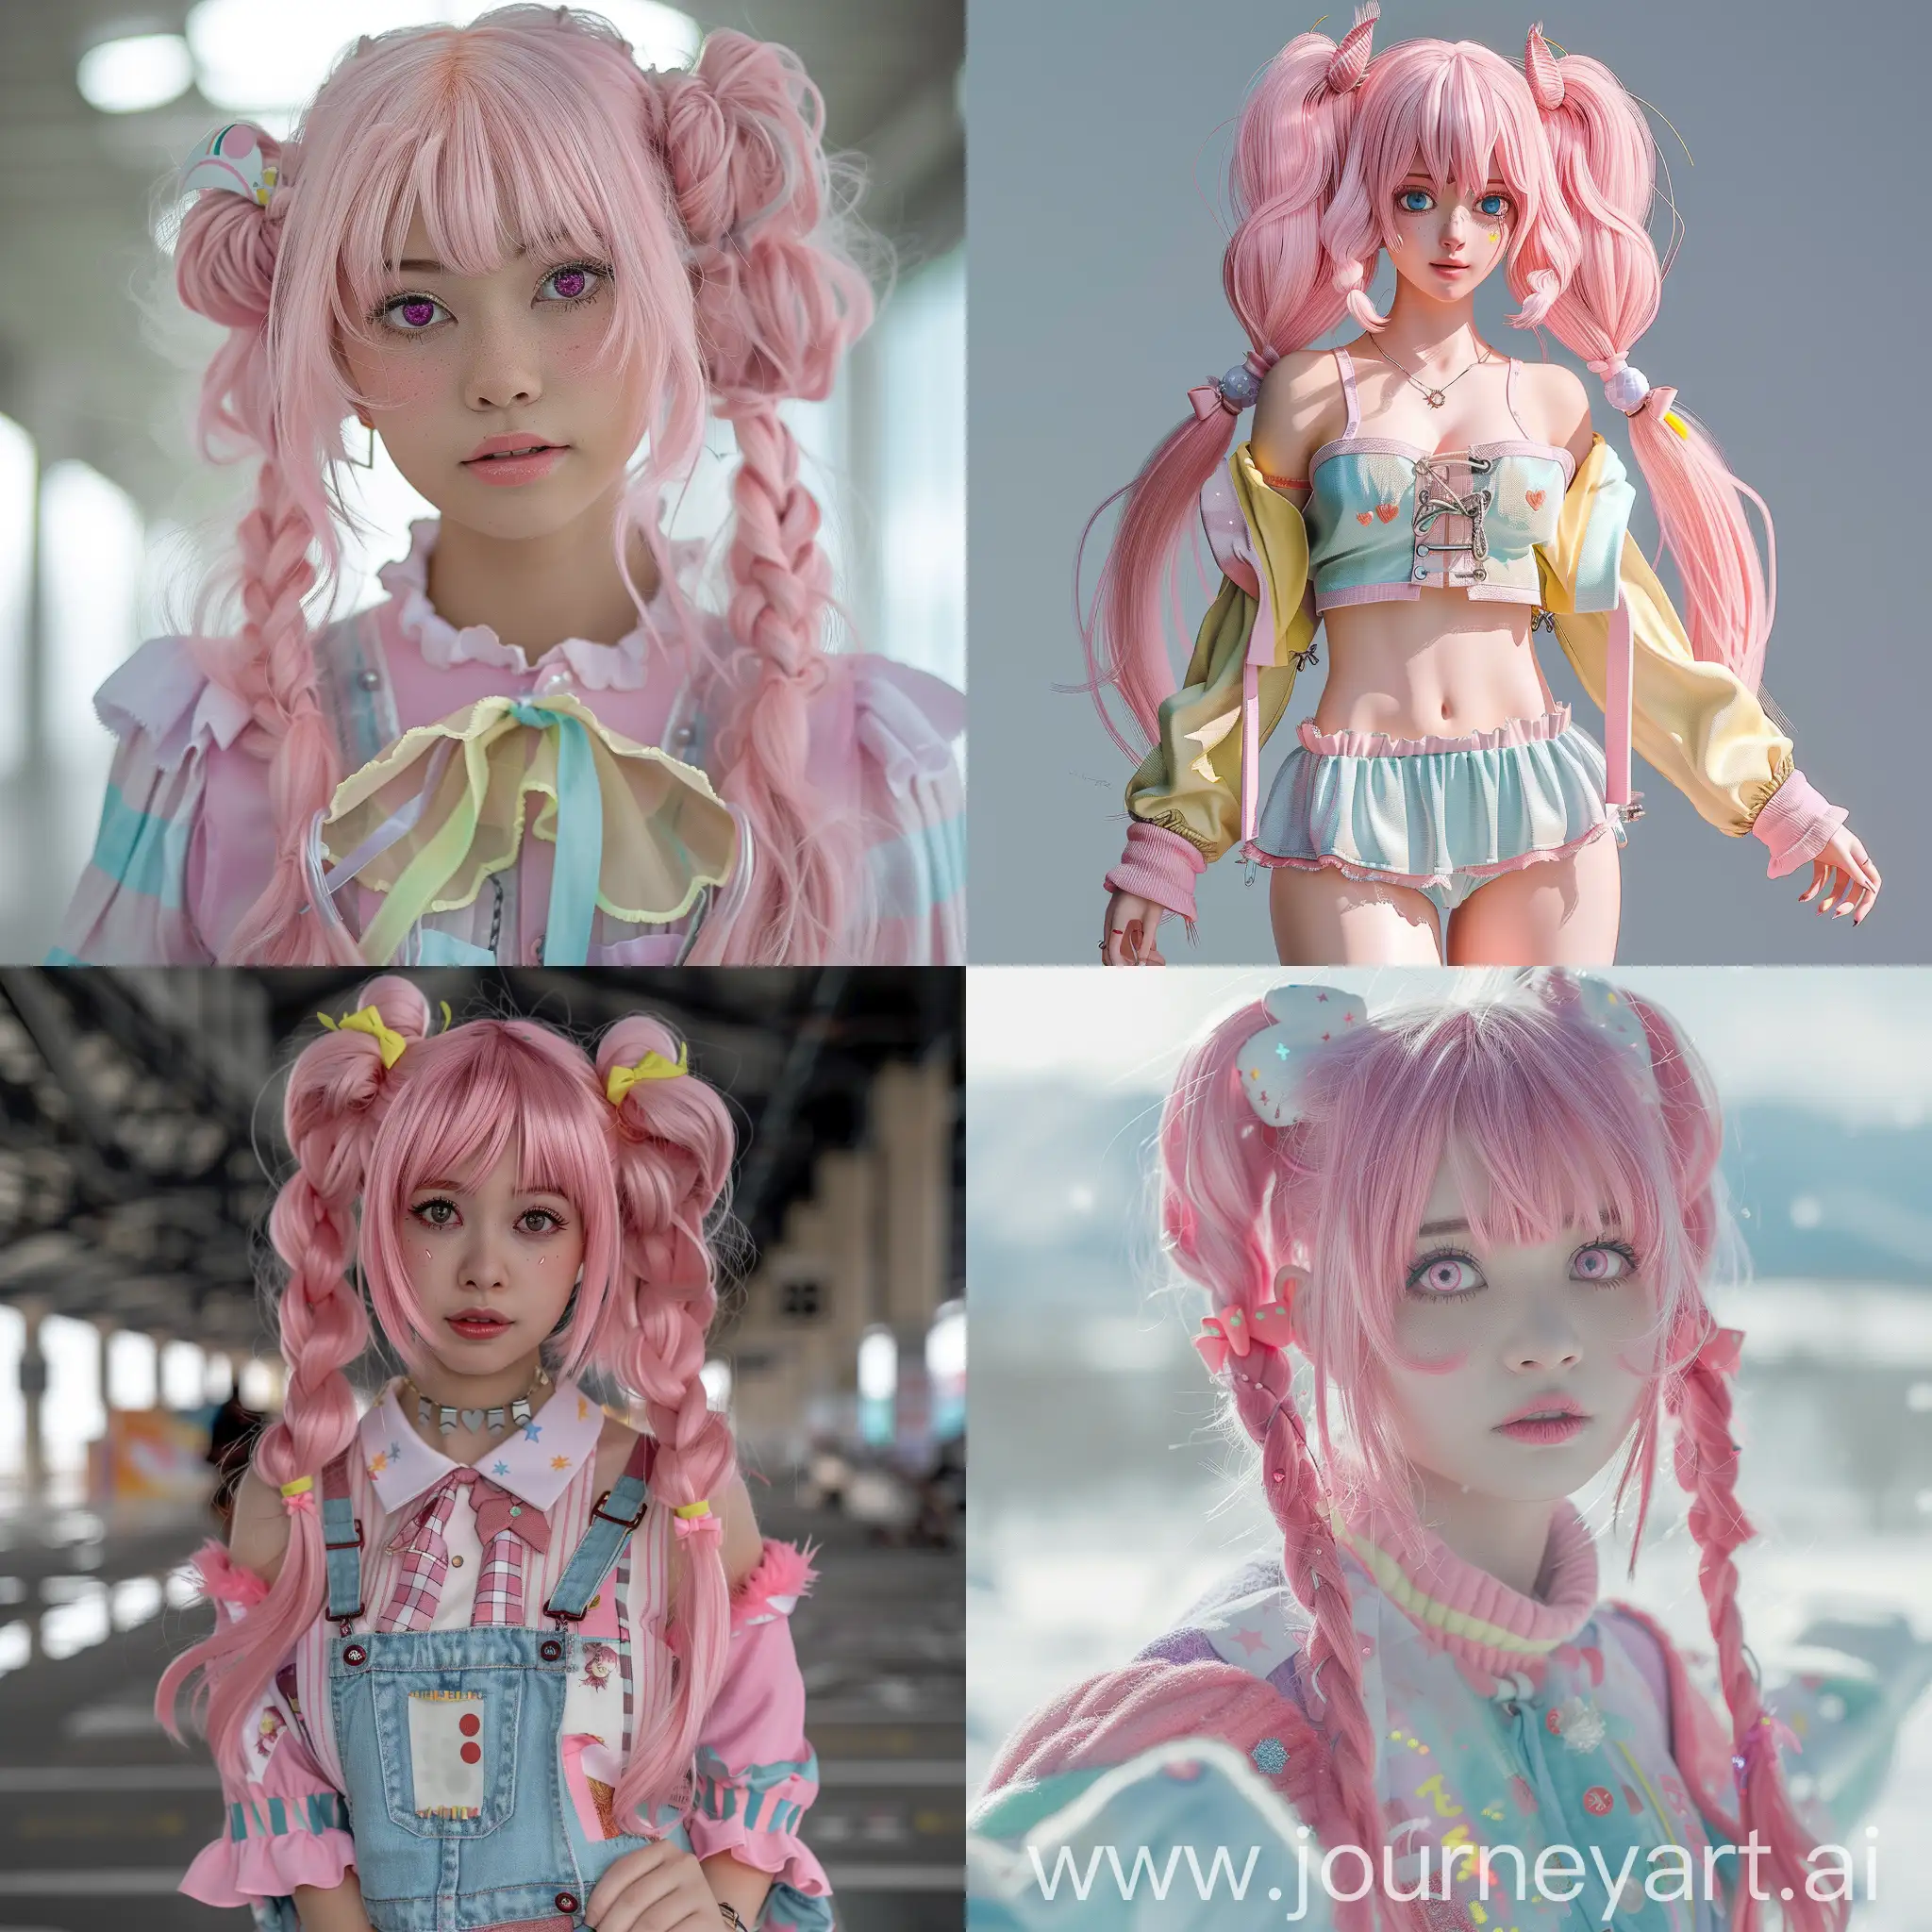 Anime type model with pink hair twintails and pastel clothes 